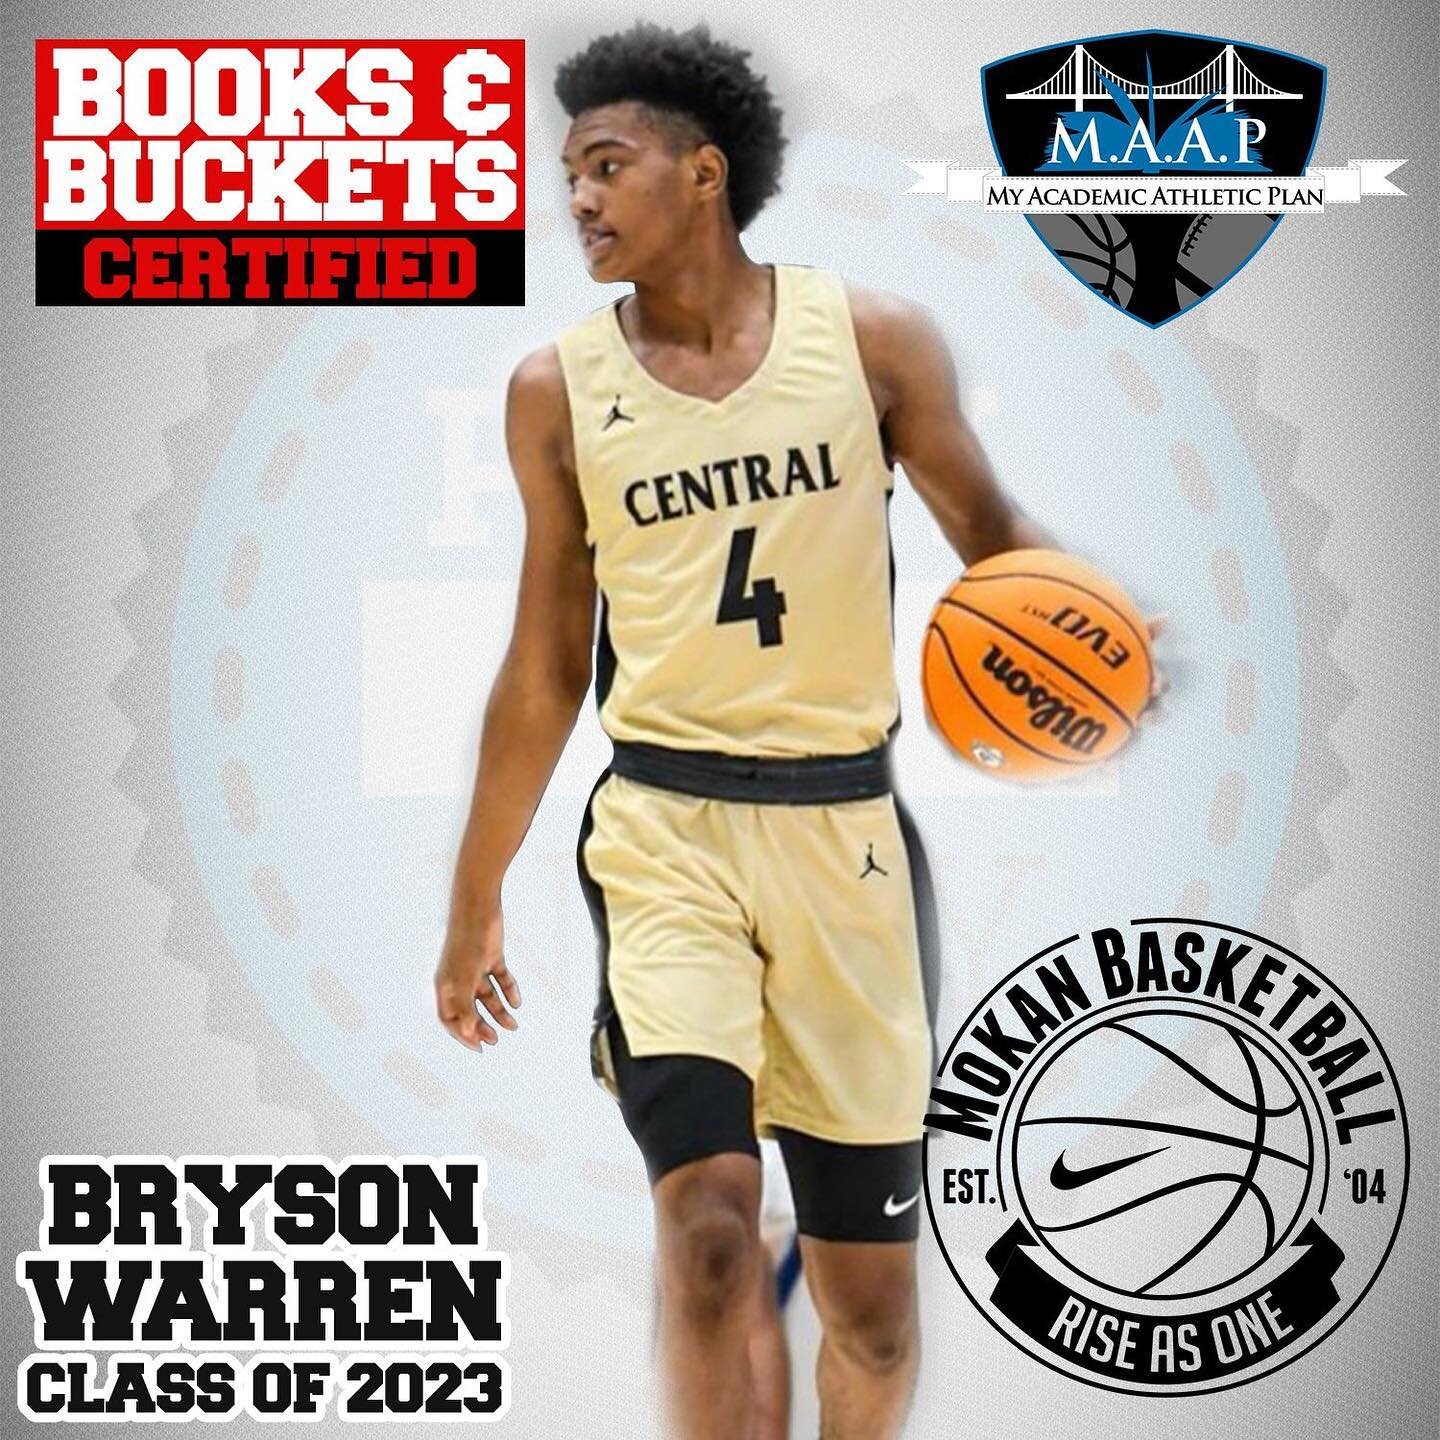 @littlerockcentralbasketball and @mokanelite guard @hesifambryson is ELITE on the court and more importantly, ELITE in the classroom .  Good luck today young fella and keep shooting for the moon!  #pinymokancollab #booksandbuckets #ittakesavillage